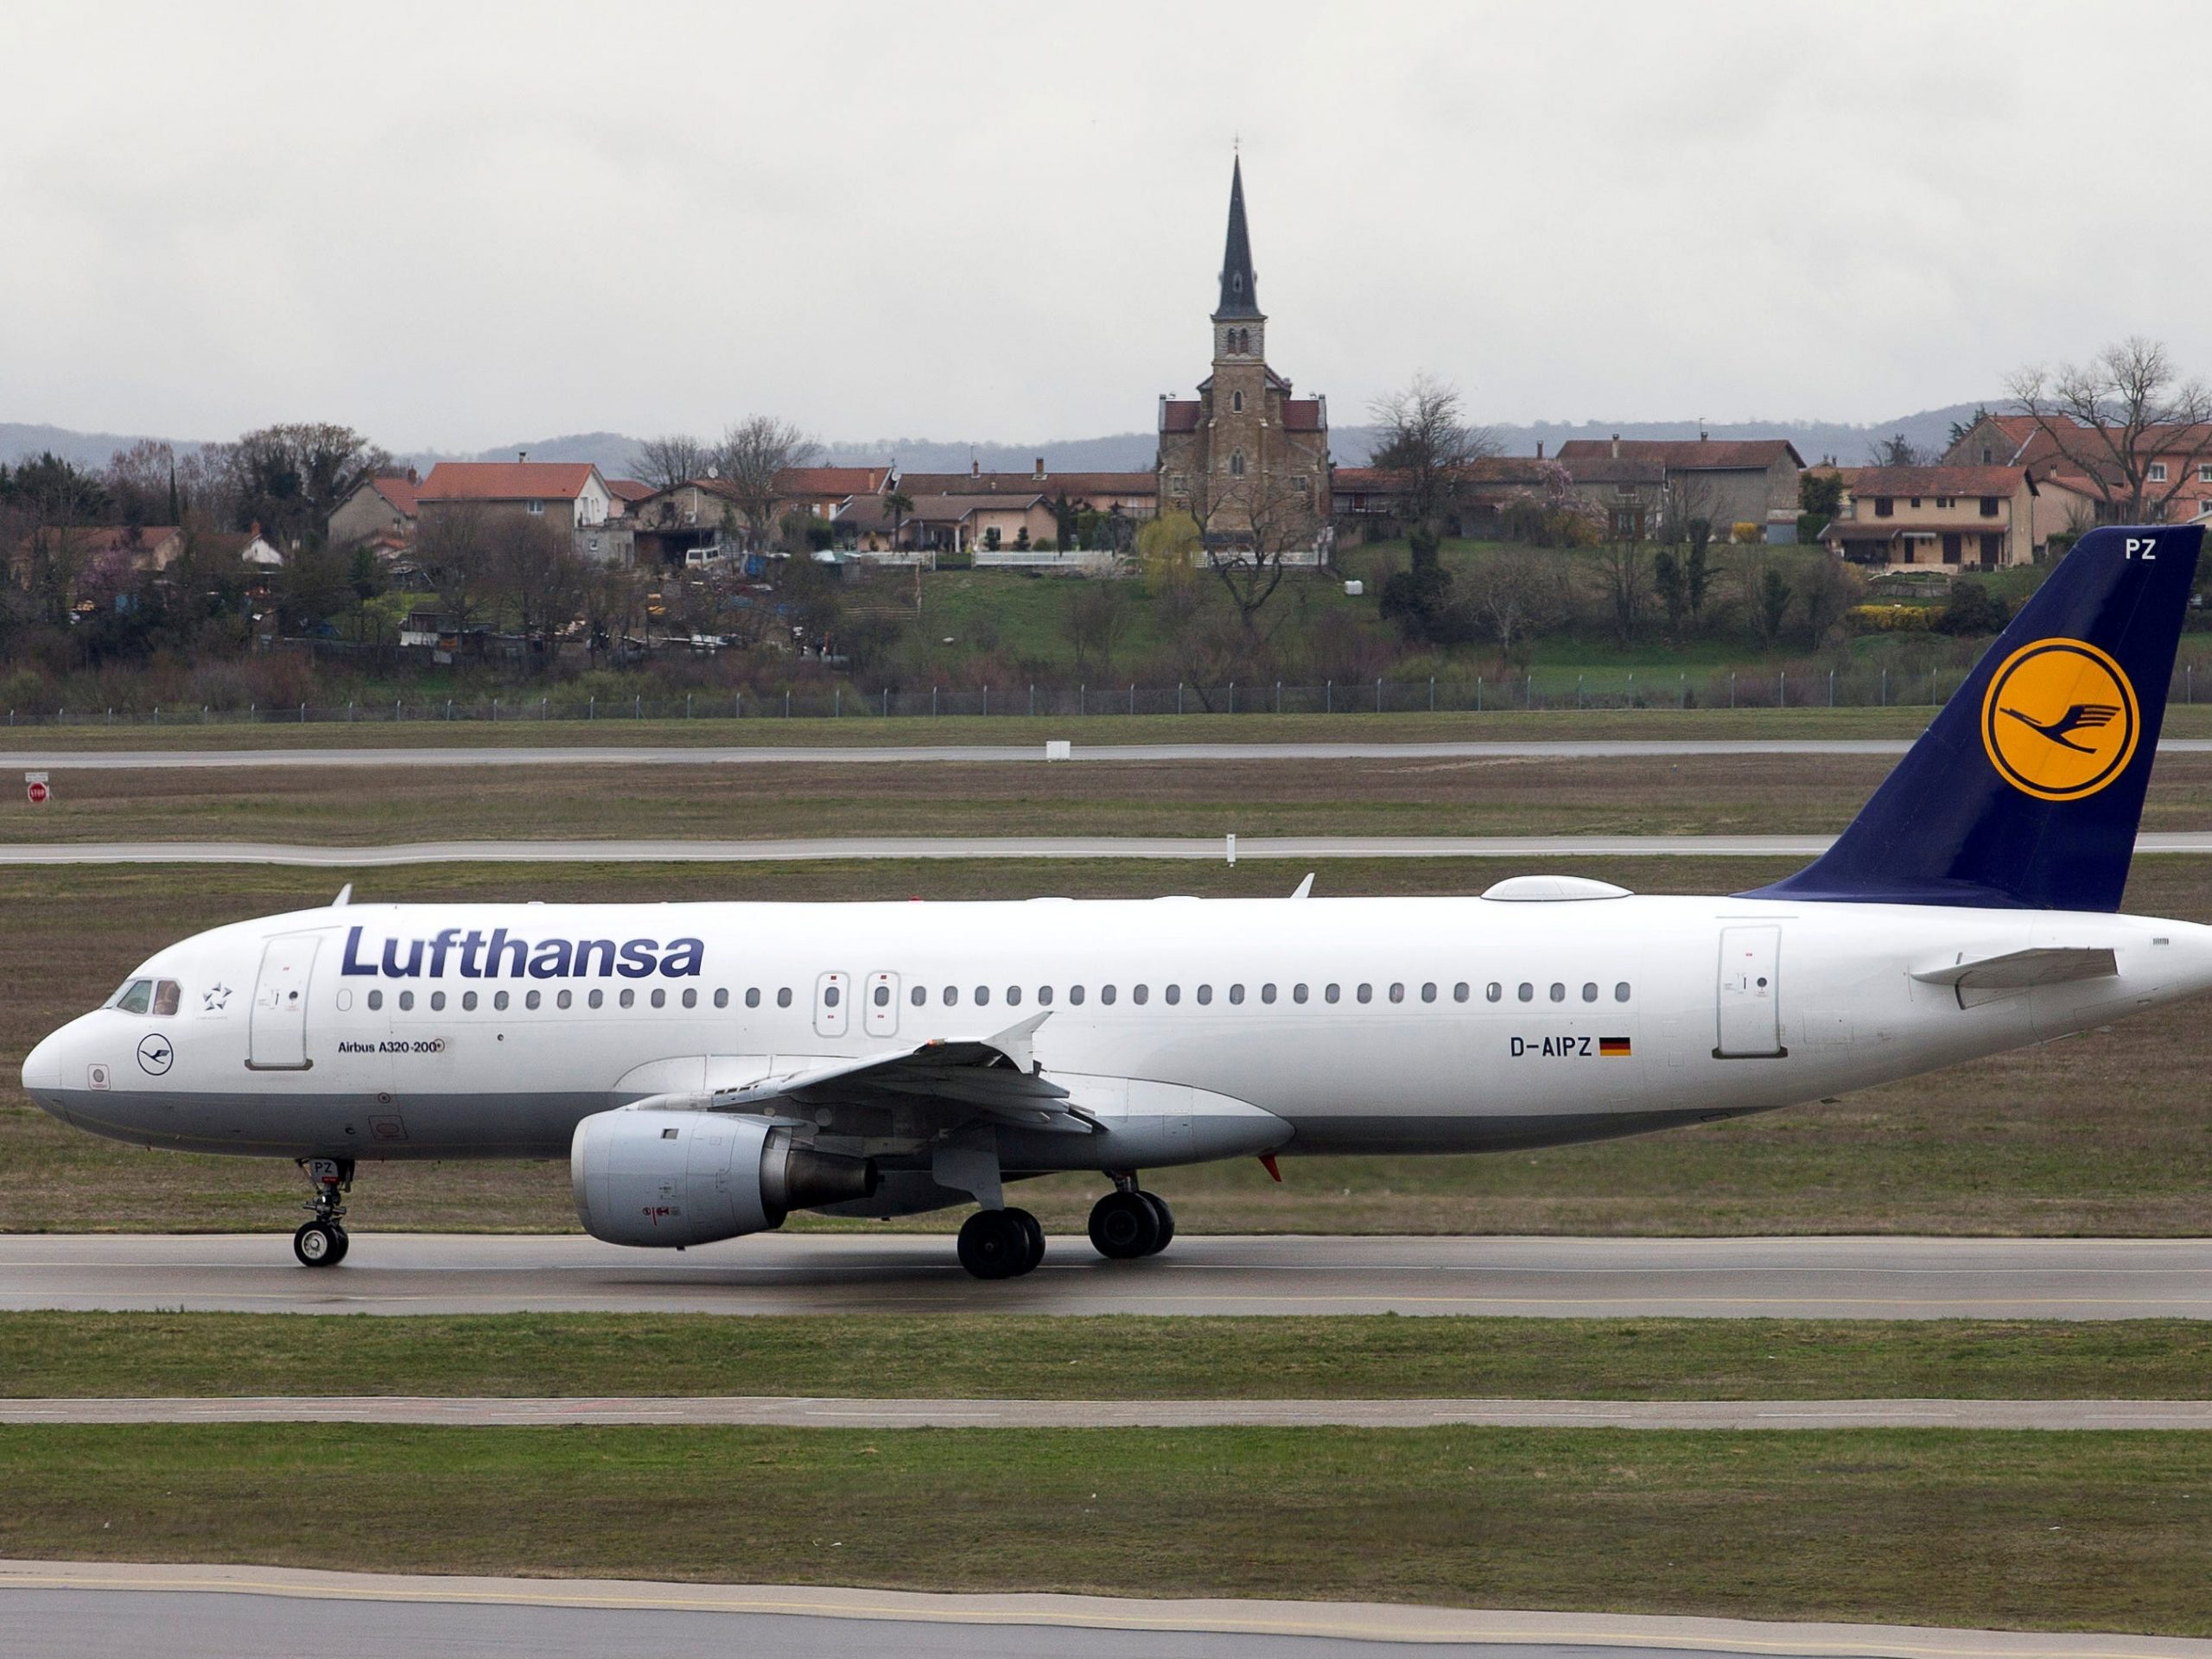 FILE PHOTO: A Lufthansa Airbus A320-200 plane is seen on the tarmac at the Lyon-Saint-Exupery airport in Colombier-Saugnieu near Lyon, France, March 14, 2019.   REUTERS/Emmanuel Foudrot/File Photo